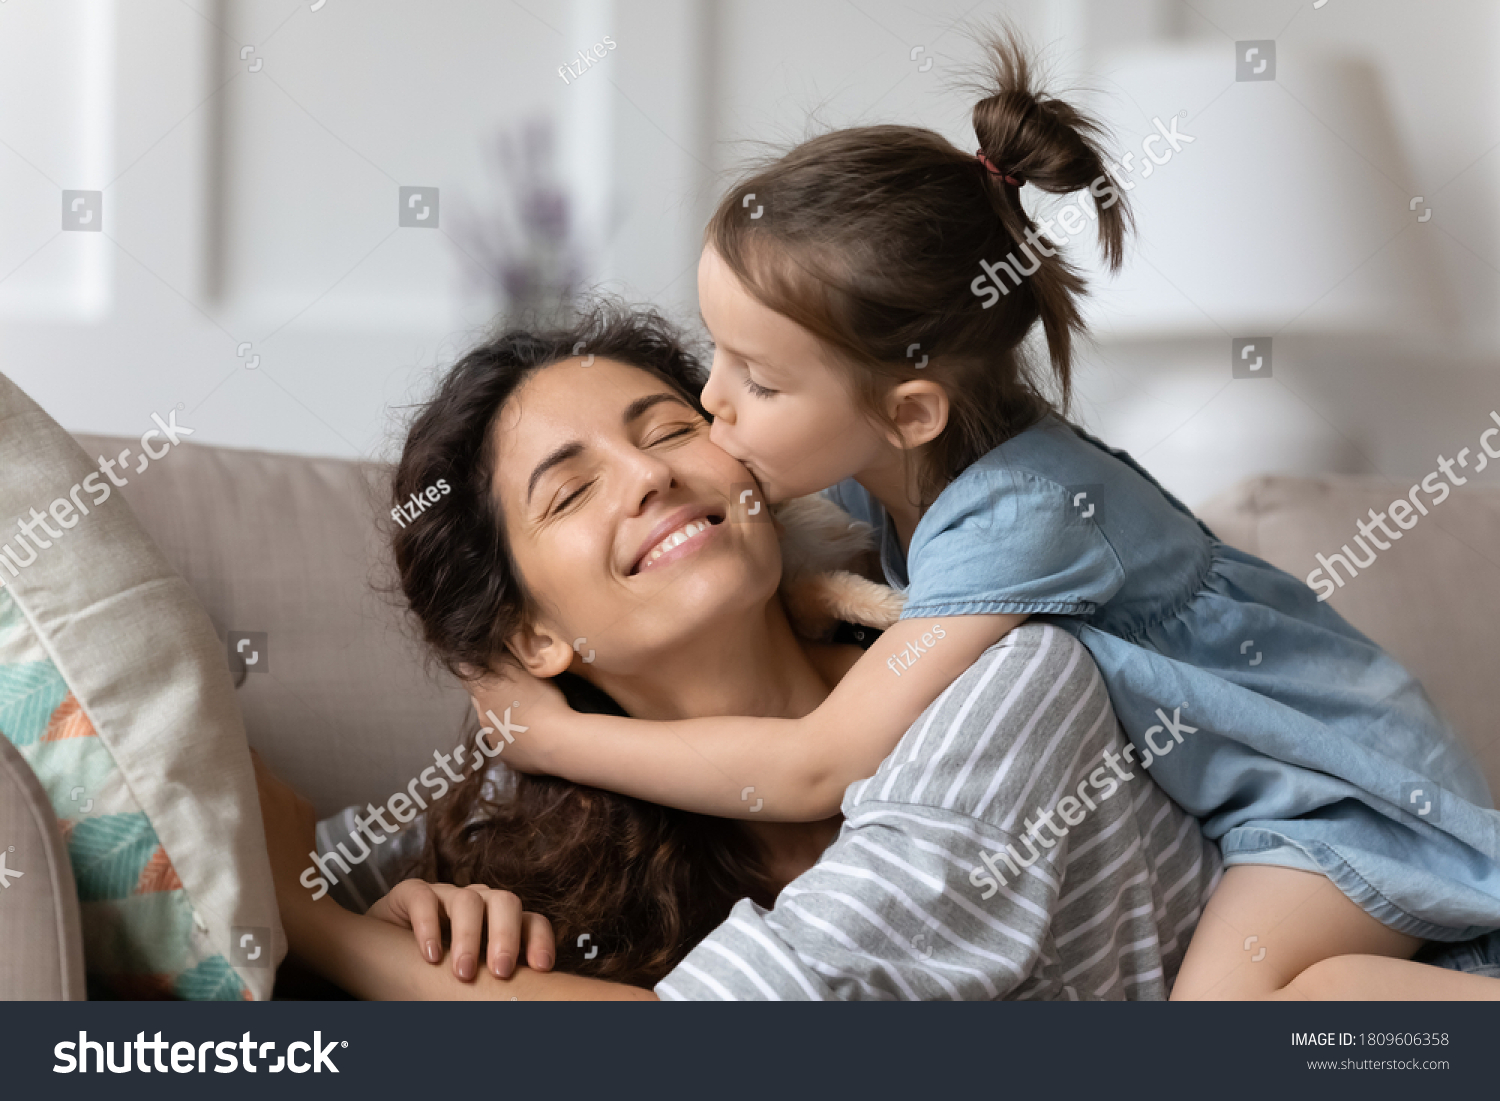 Little daughter gently cuddles kiss mother on cheek showing love and express caress resting on couch at home. Happy family, pleasure be mommy, mother day congratulations, sweet moment together concept #1809606358